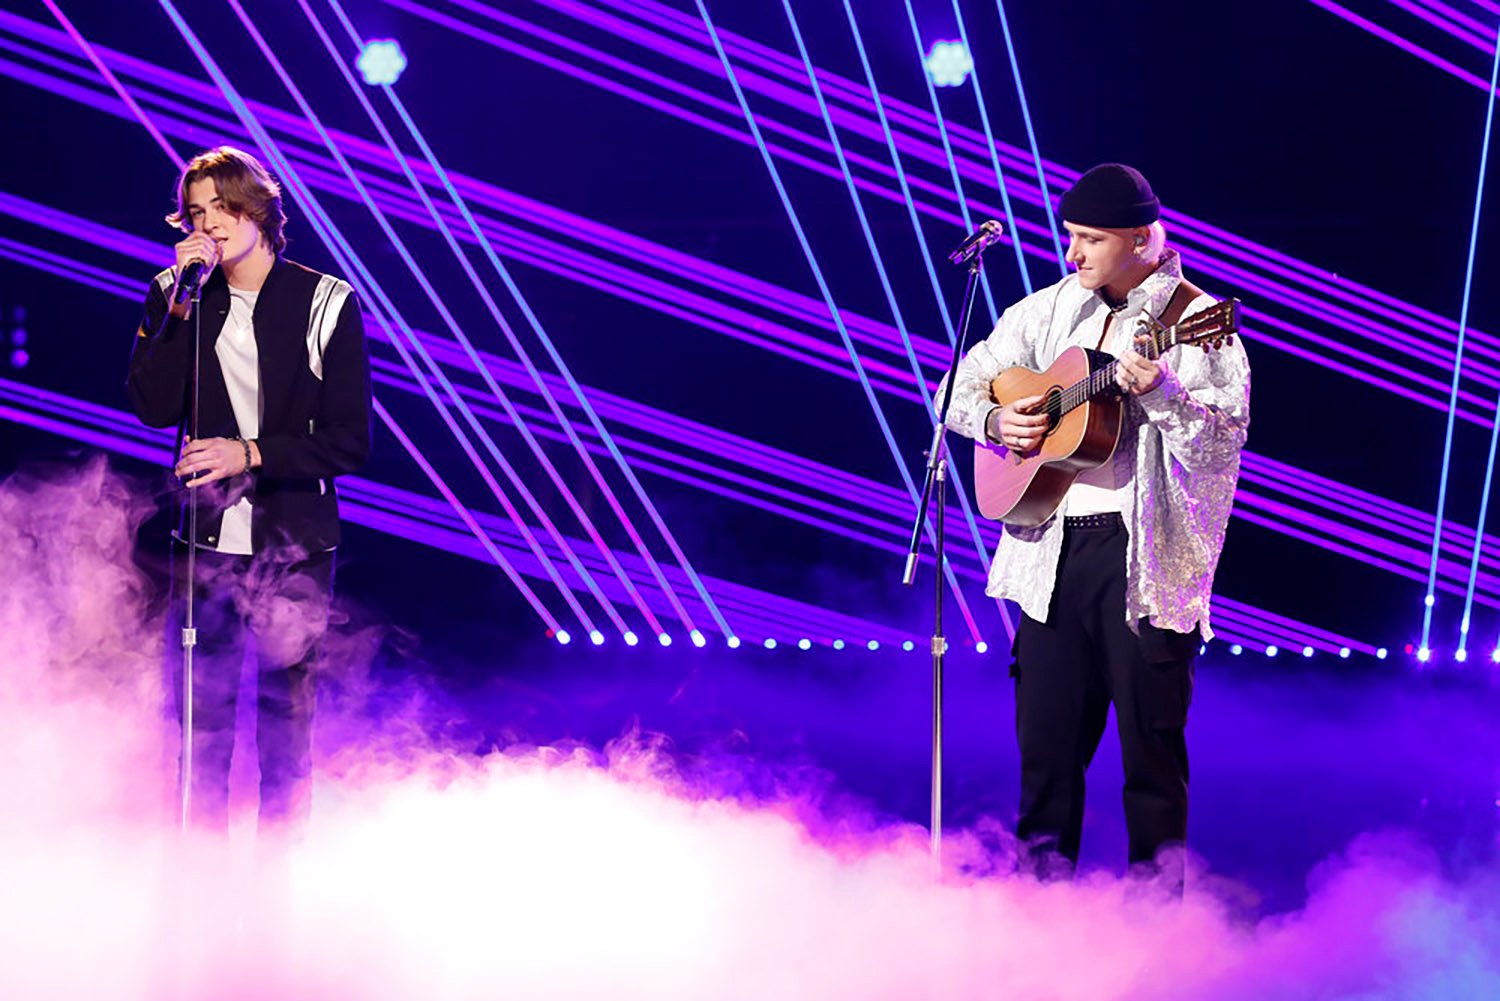 Brayden Lape and Bodie perform a duet on The Voice Season 22 one week before the finale.